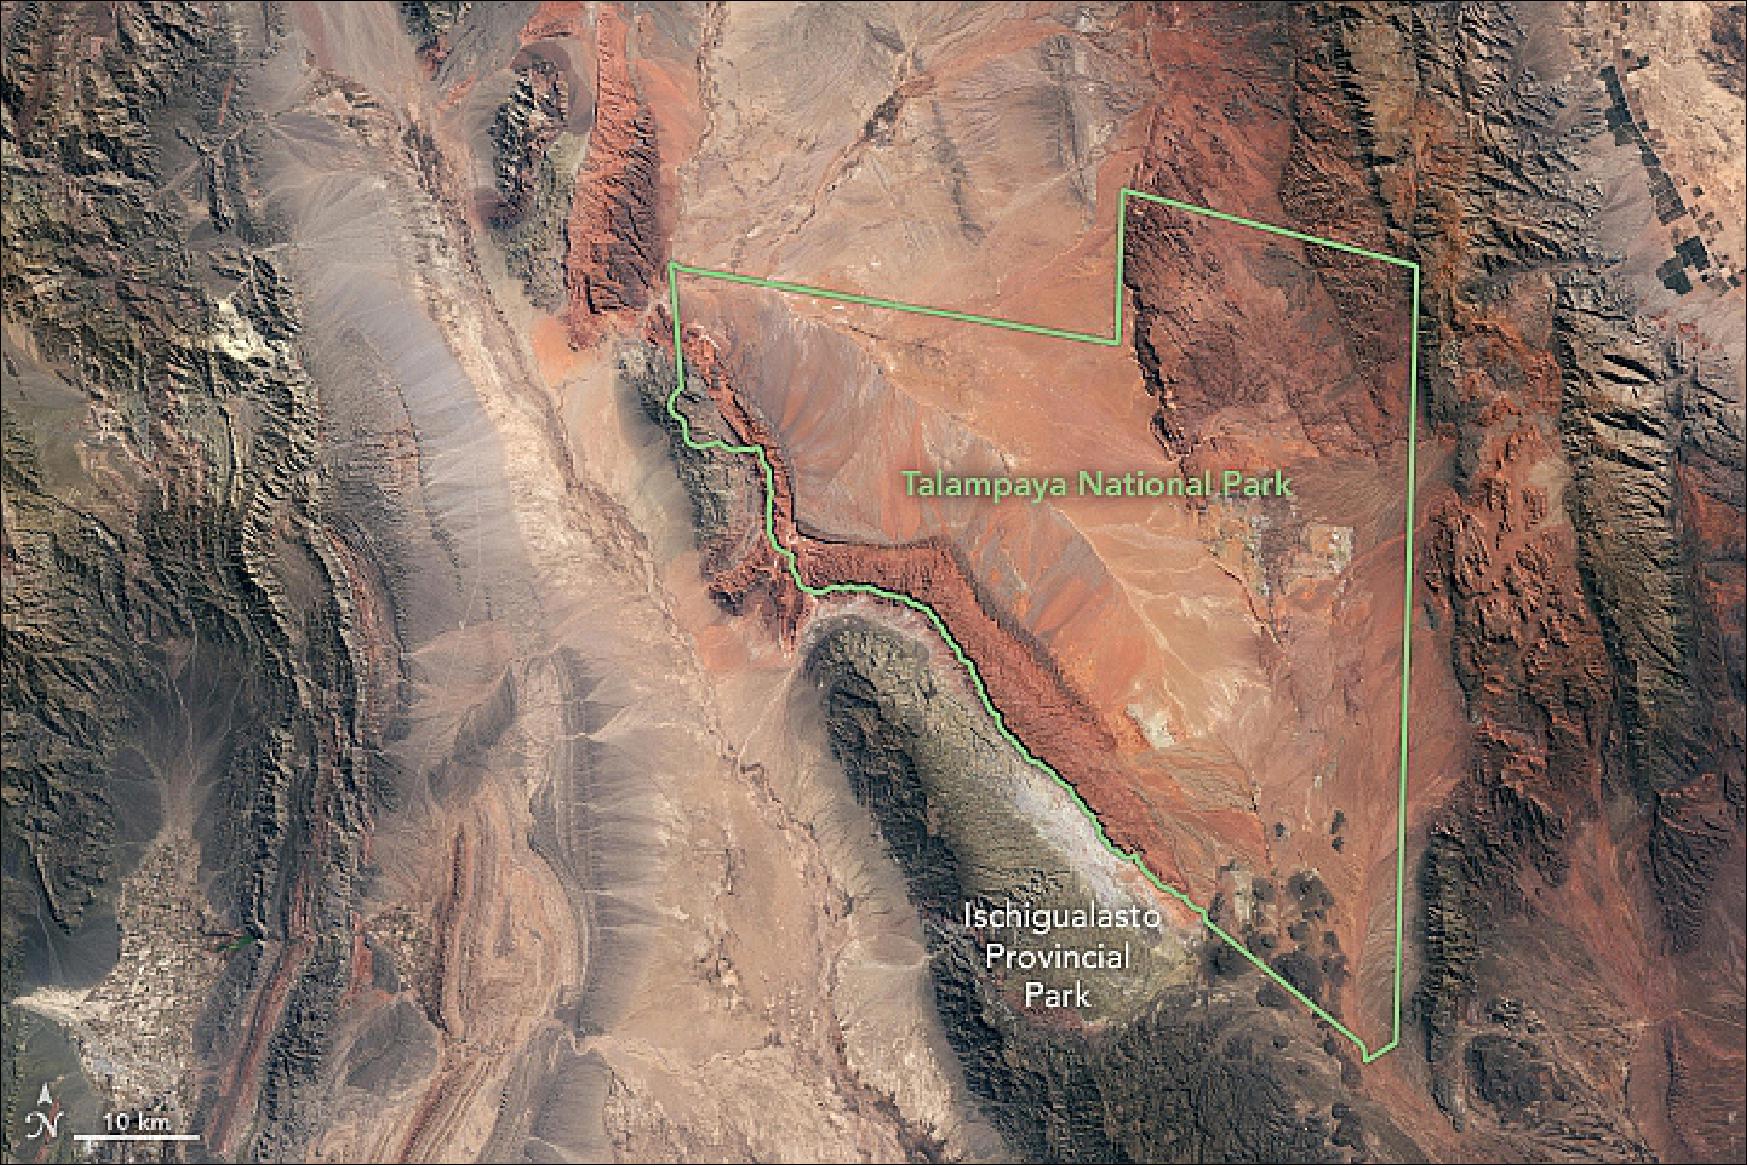 Figure 115: This image shows two notable dinosaur habitats, the Talampaya and Ischigualasto Natural Parks, located near the Argentina-Chile border. This image was acquired by the OLI (Operational Land Imager) by Landsat-8 on August 25, 2018. Together, the parks cover more than 275,000 hectares (2750 km2), image credit: NASA Earth Observatory, image by Lauren Dauphin, using Landsat data from the U.S. Geological Survey. Story by Kasha Patel.